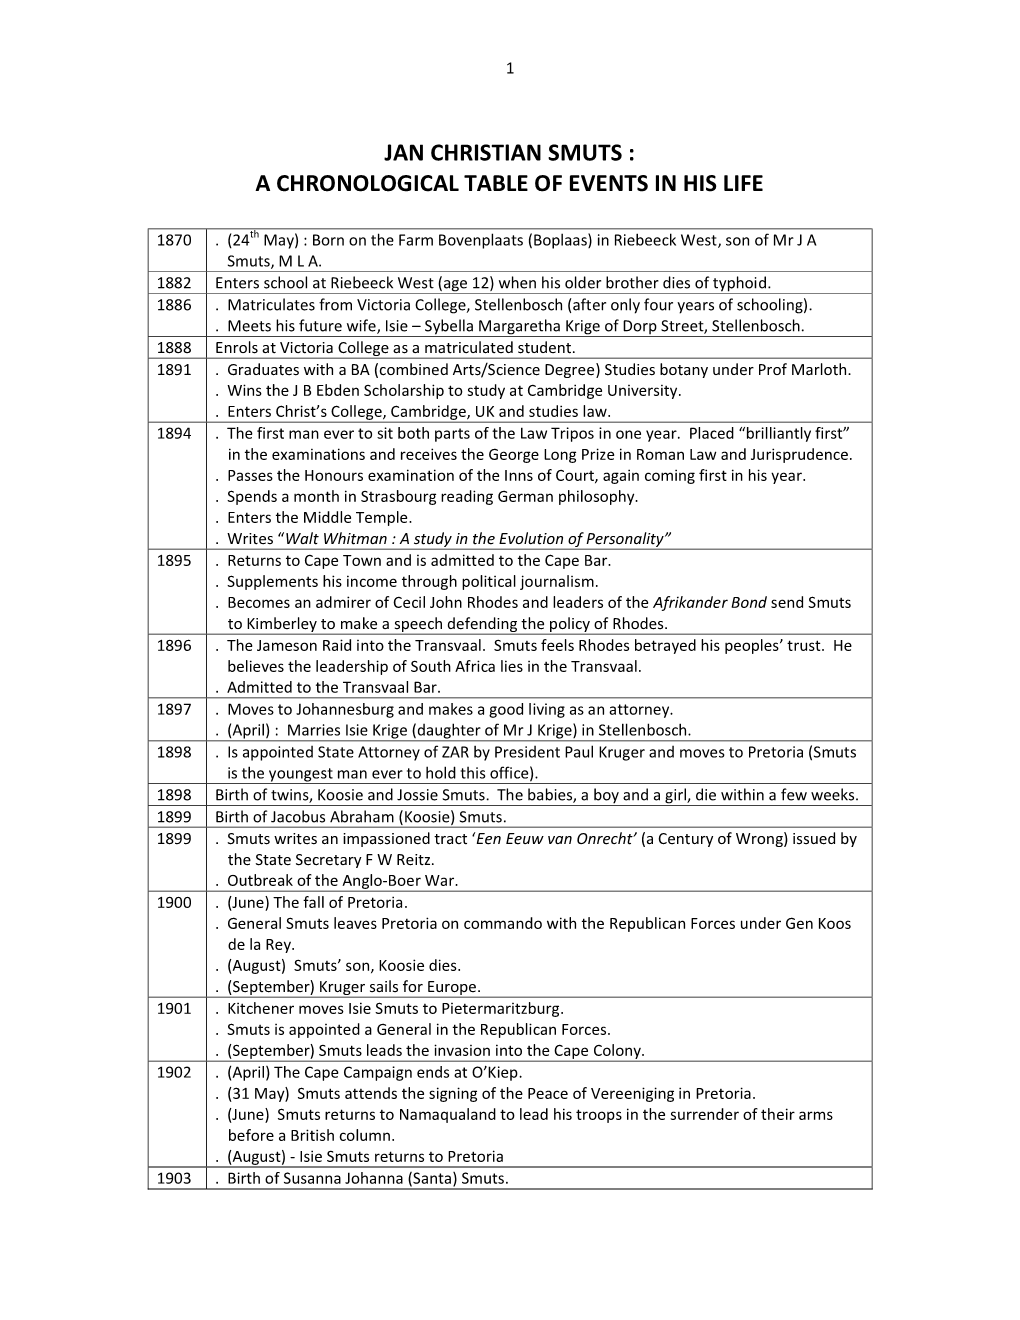 Jan Christian Smuts : a Chronological Table of Events in His Life